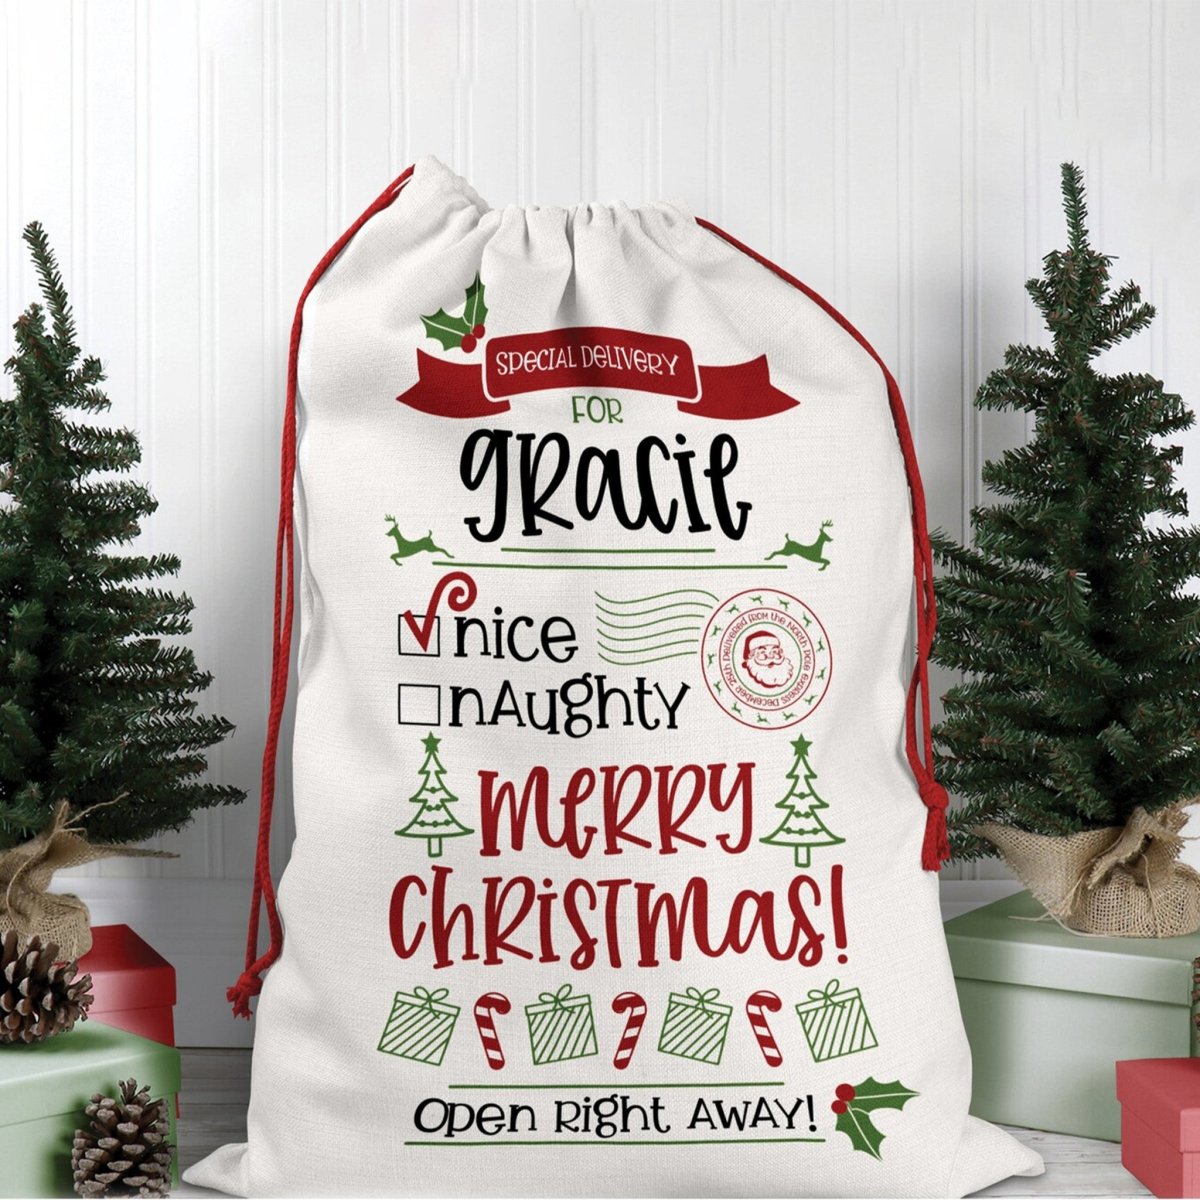 Playful Santa Personalized Christmas Gift Delivery SackCustomly Gifts